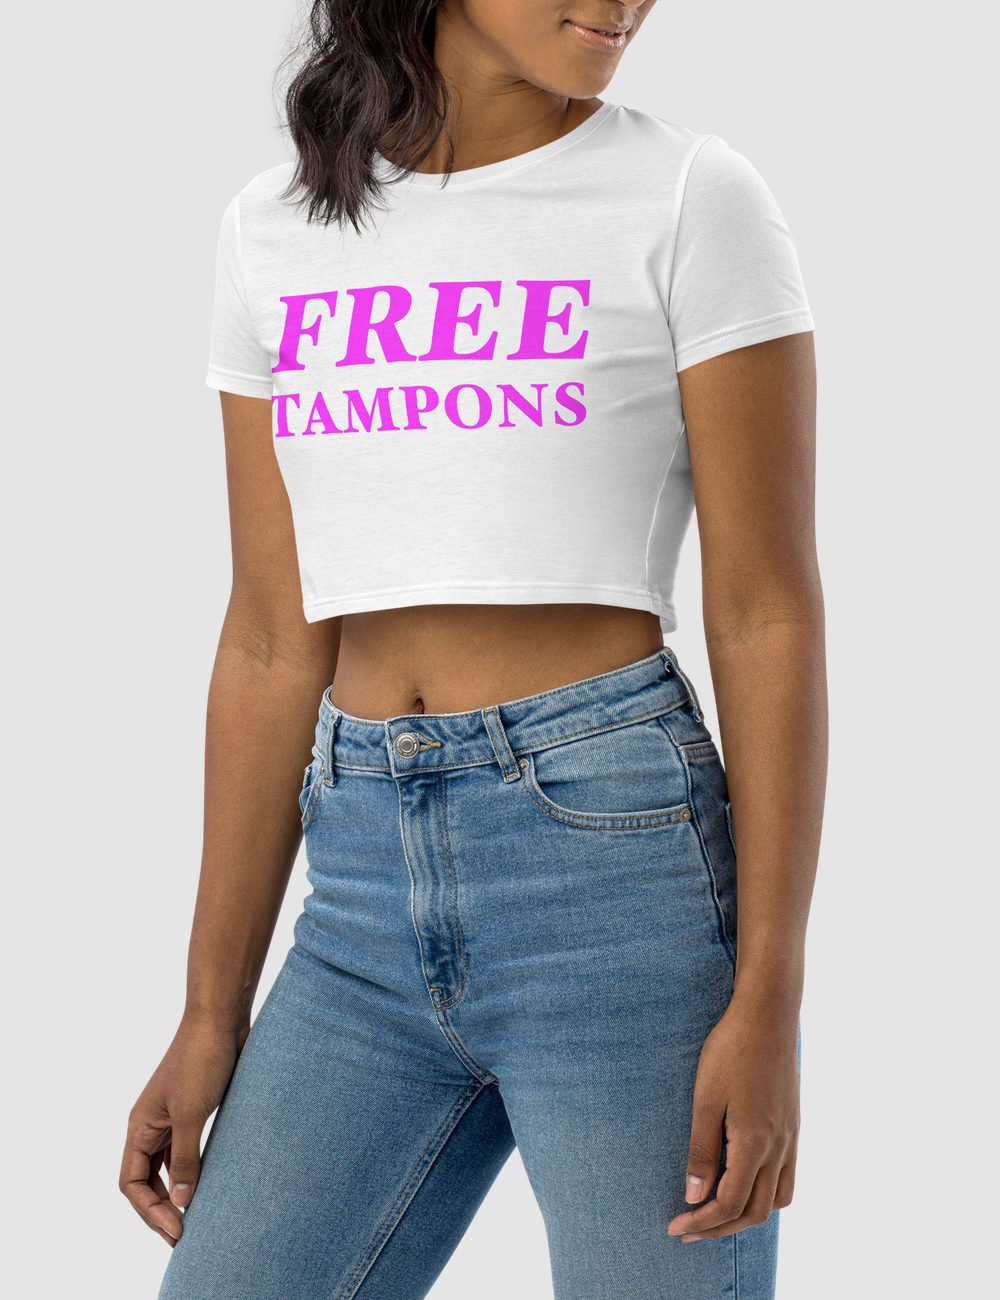 Free Tampons Women's Fitted Crop Top T-Shirt OniTakai